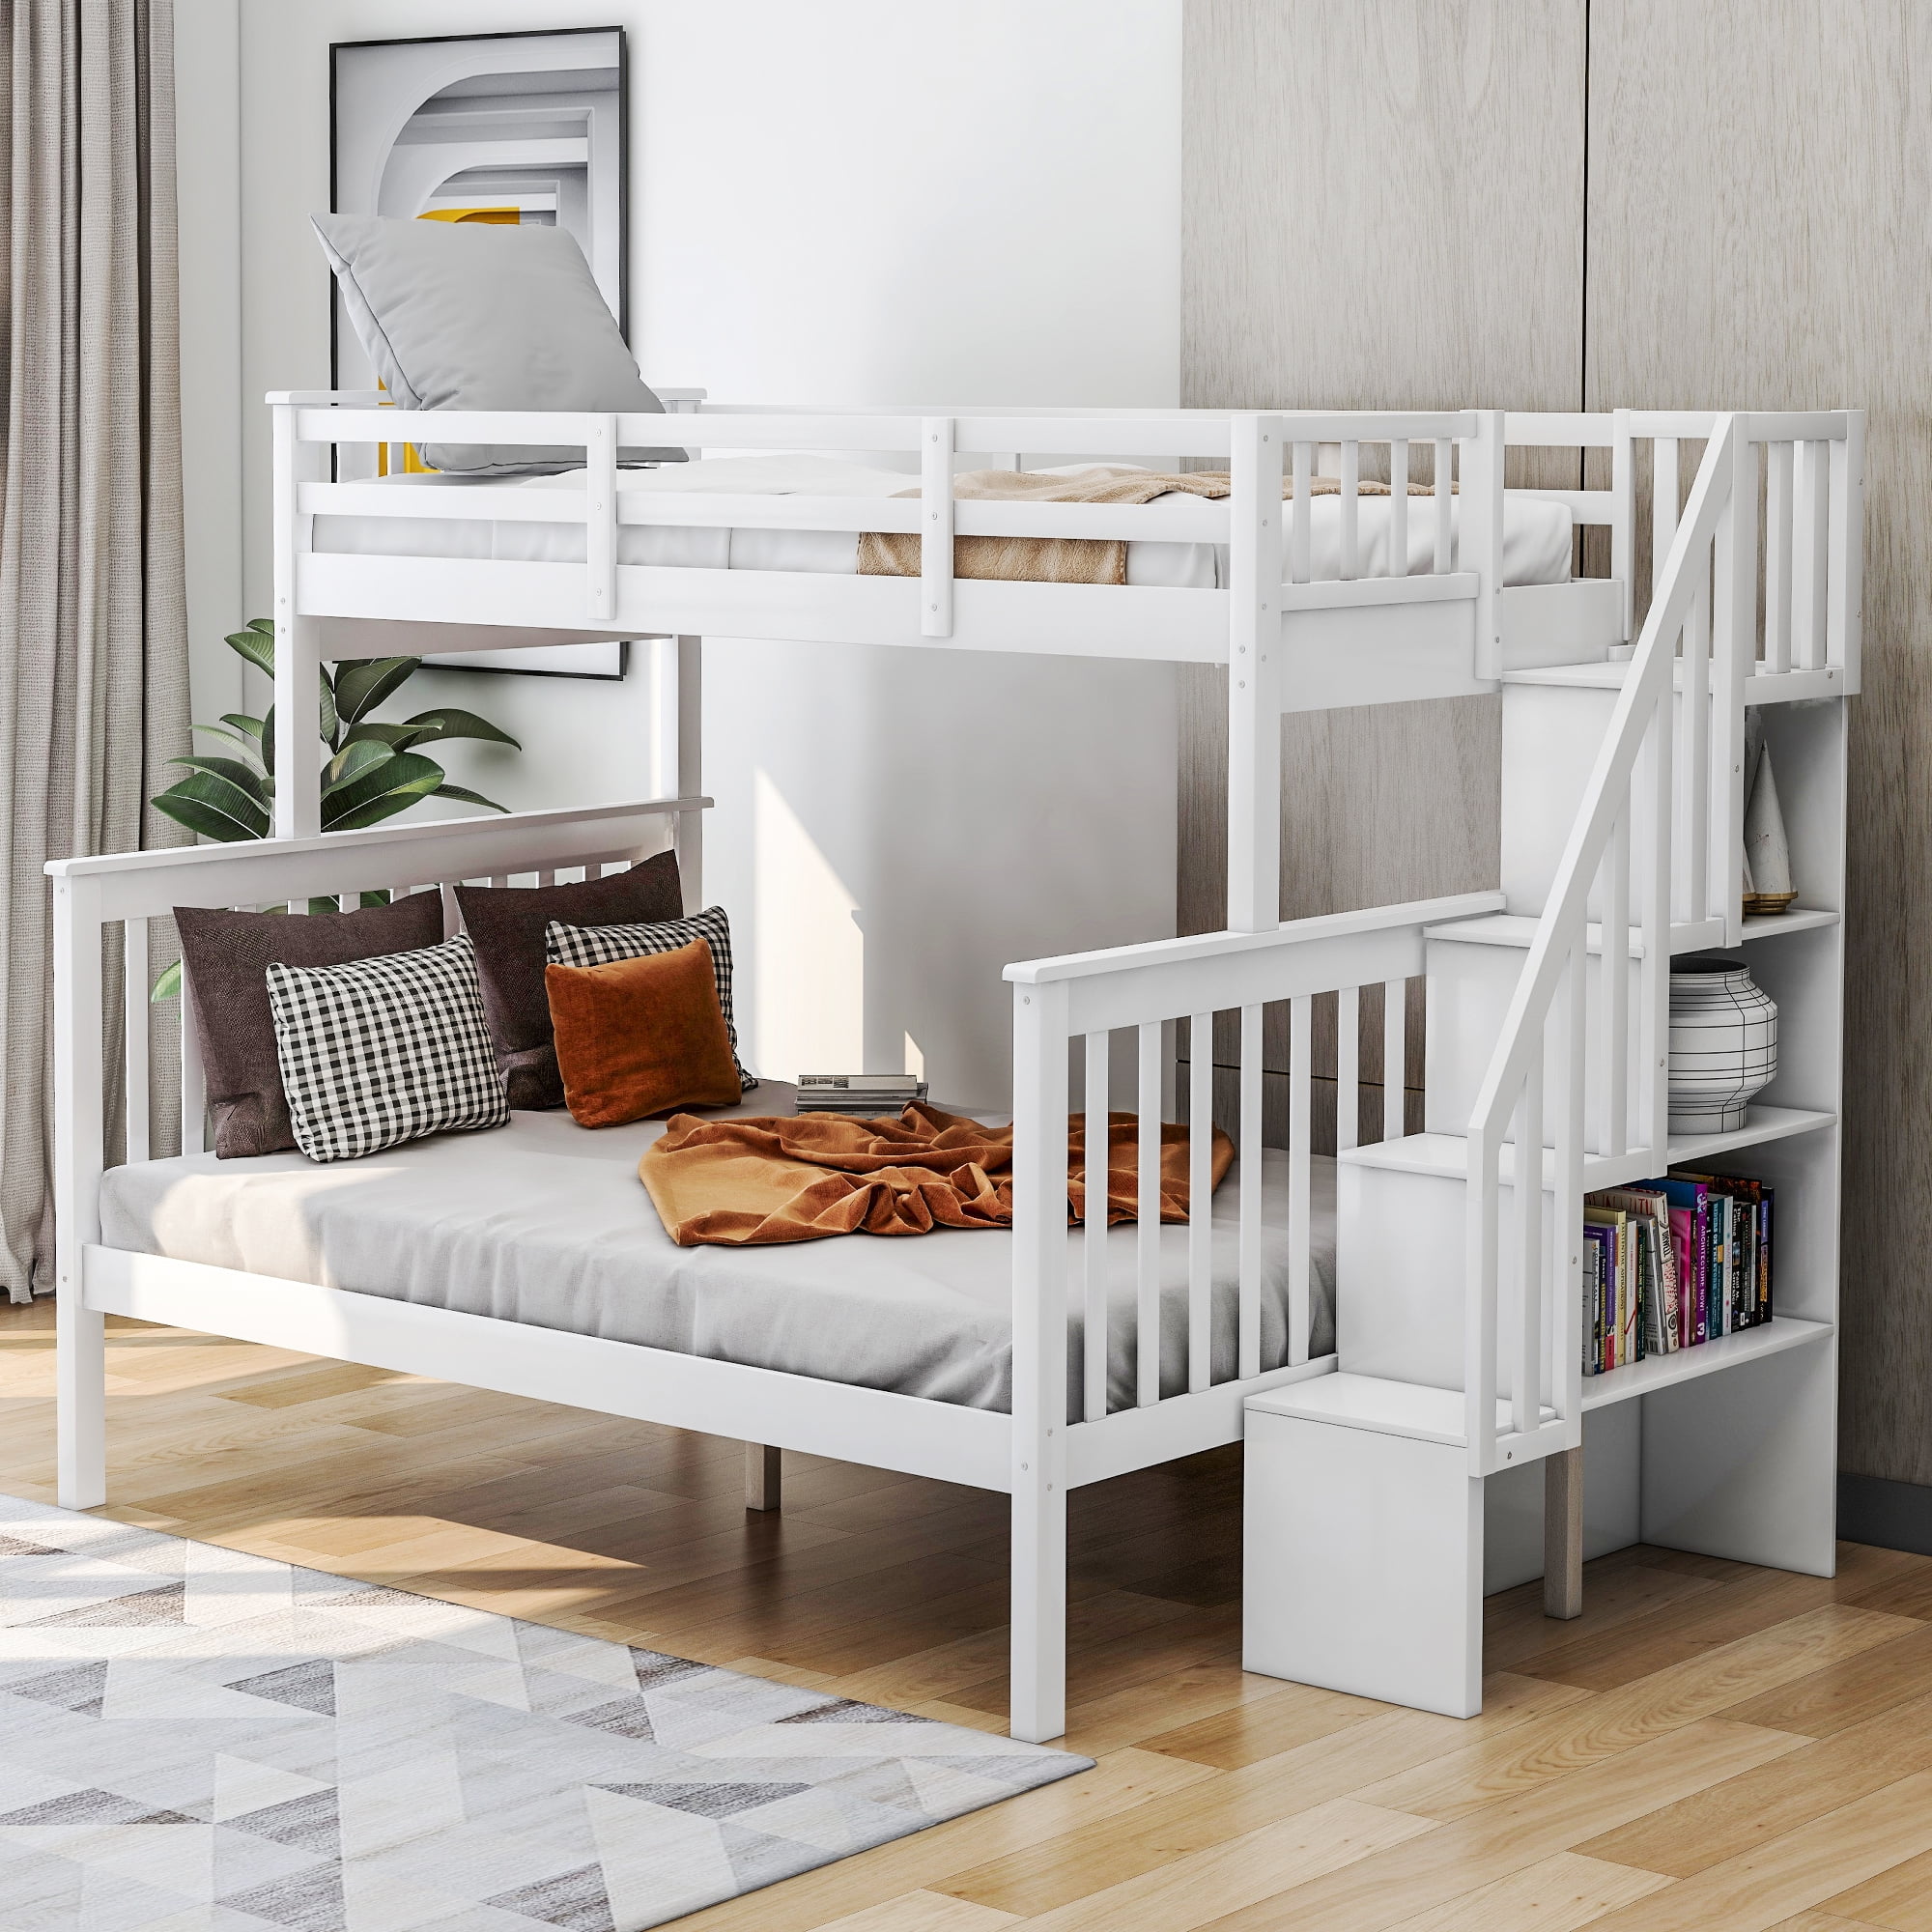 Kids Bunk Beds For Boys Girls Twin, Loft Bed Frame With Storage